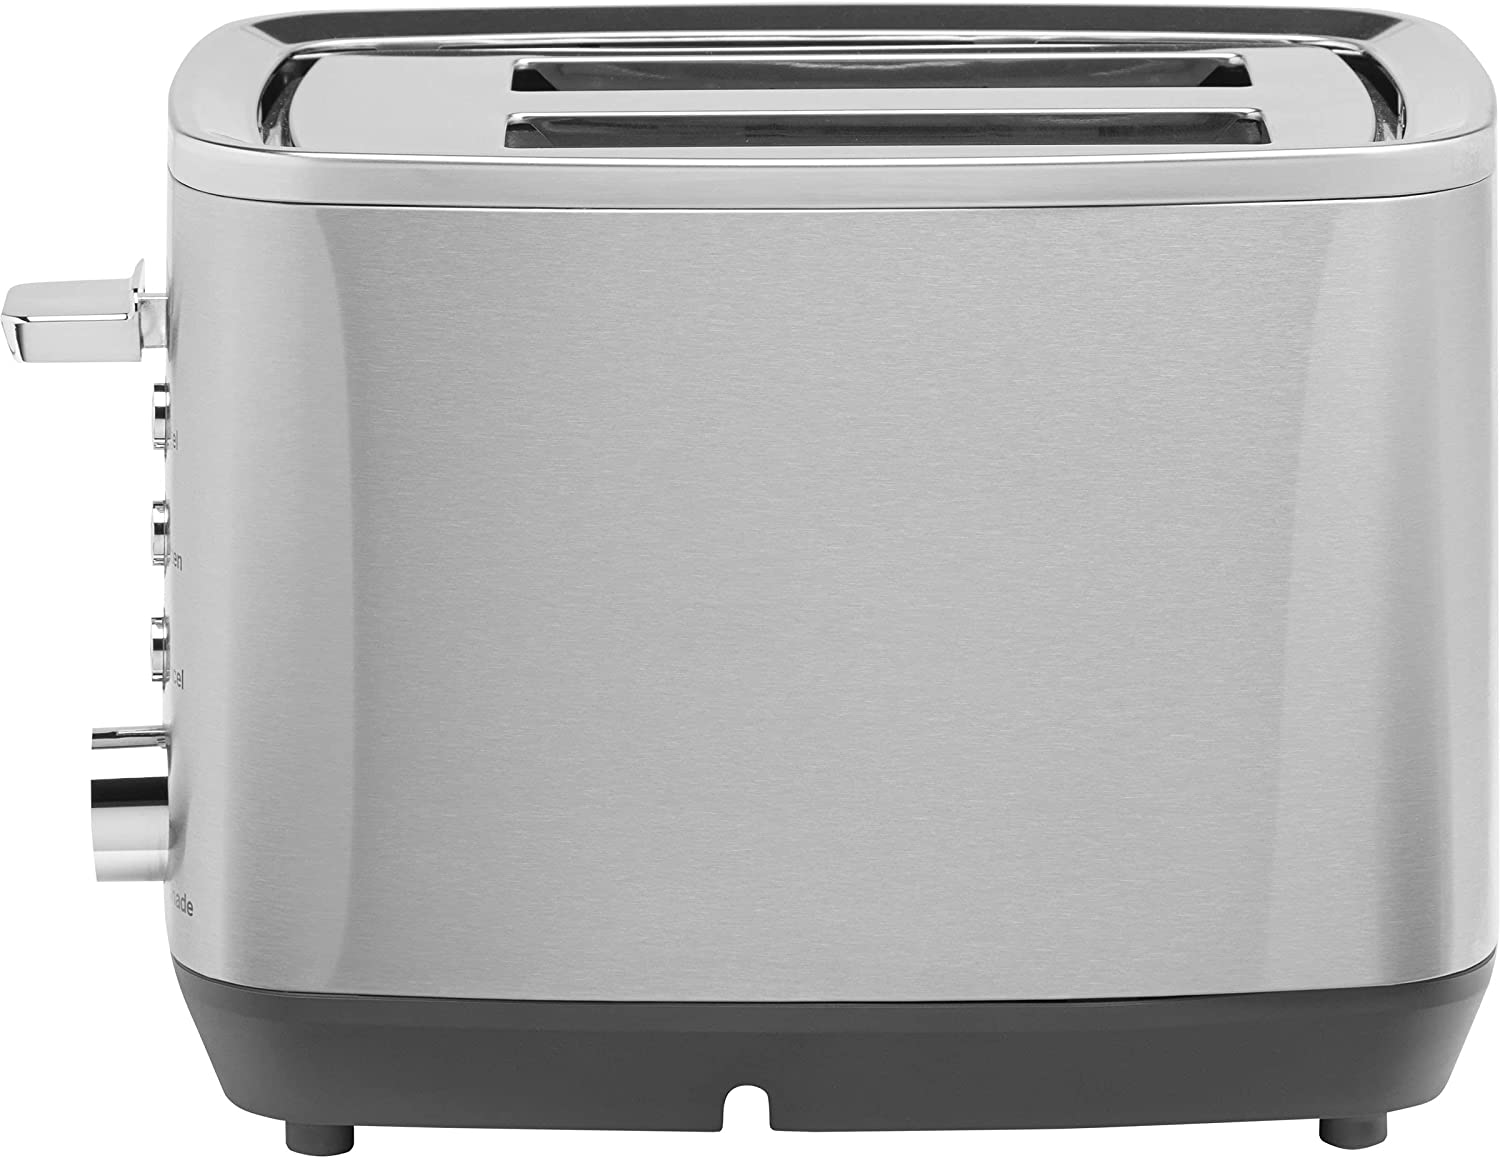 GE Stainless Steel Toaster 2 Slice Extra Wide Slots for Toasting Bagels,  Breads, Waffles & More 